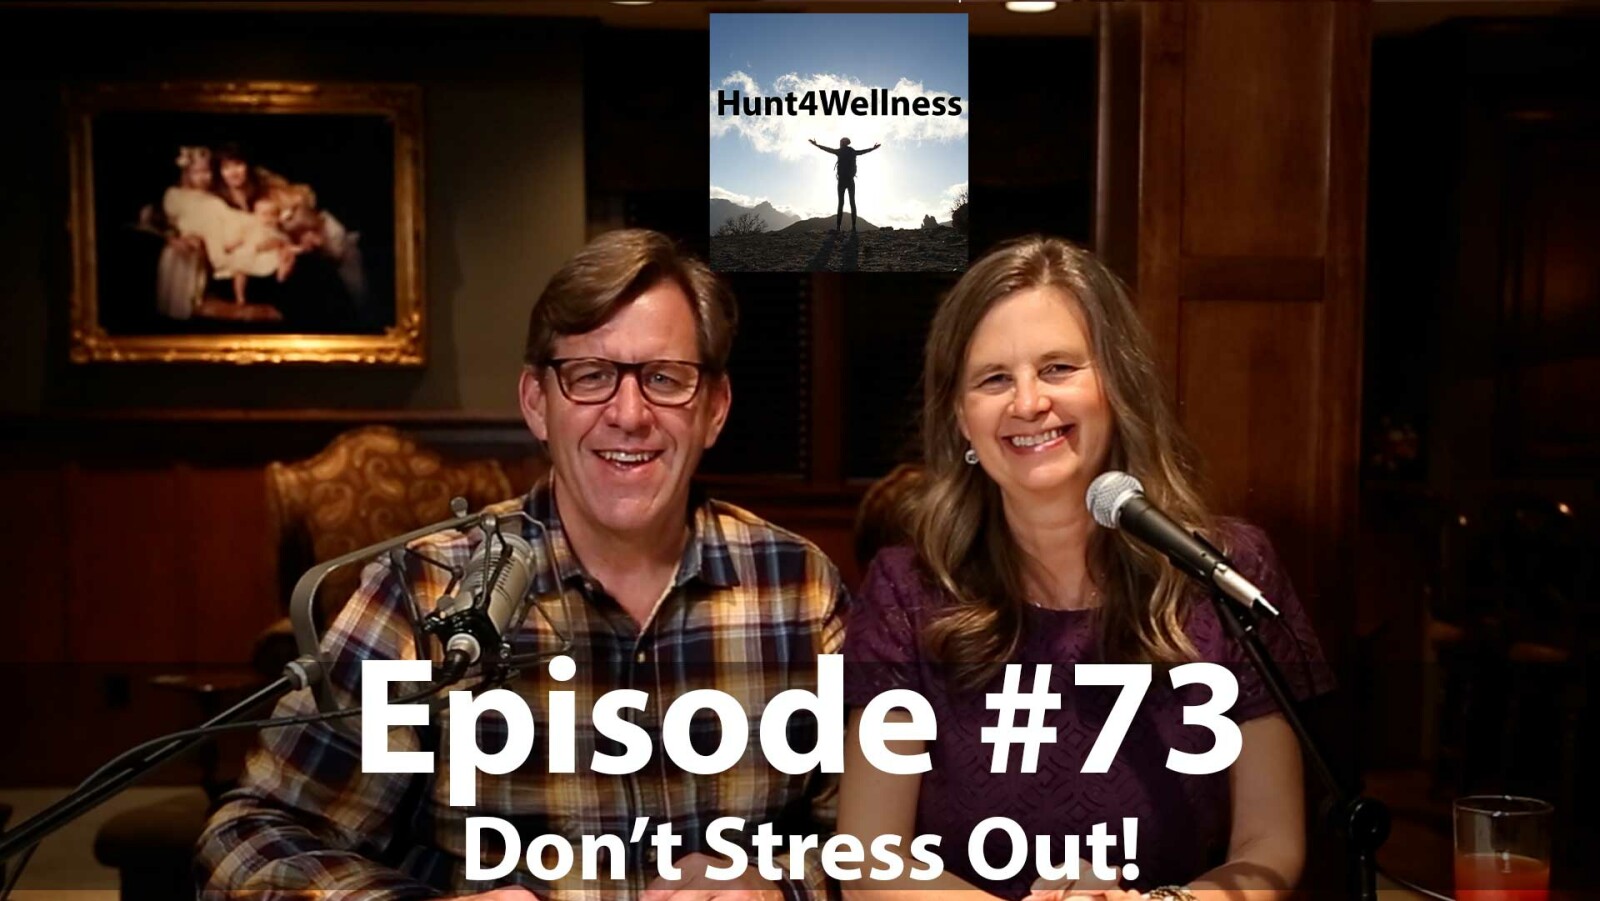 Episode #73 - Don't Stress Out!